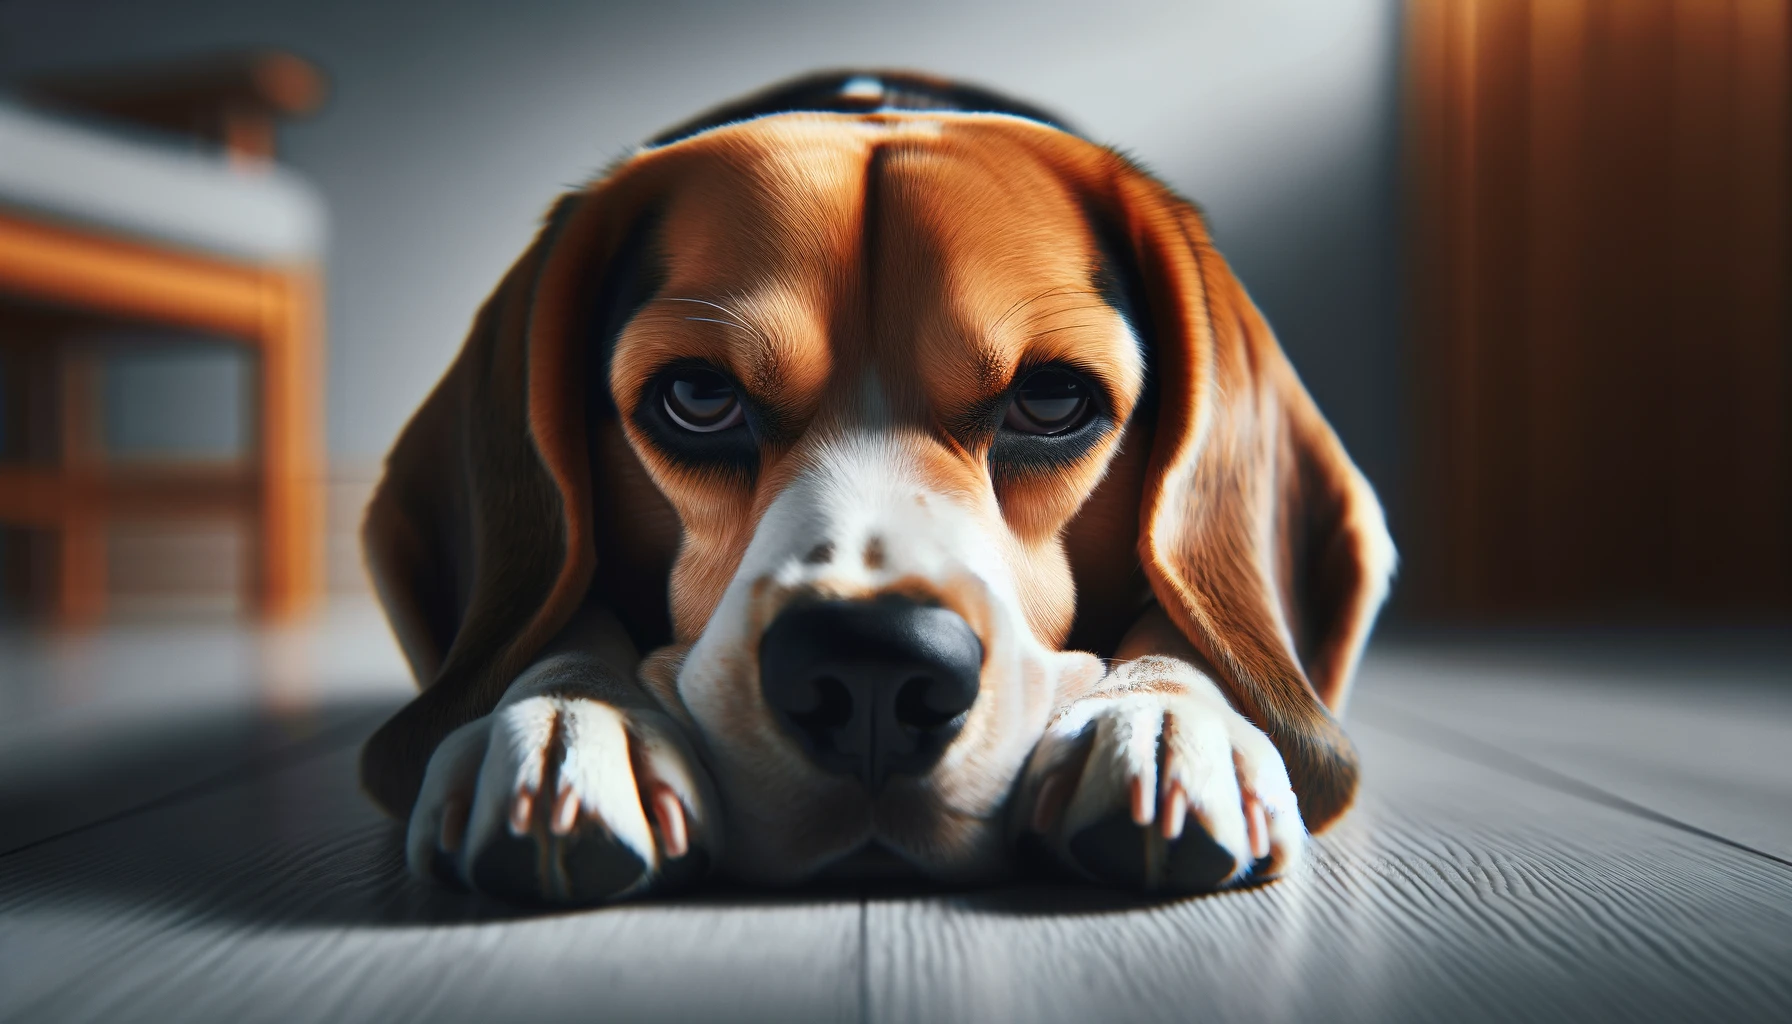 A Beagle showing signs of boredom